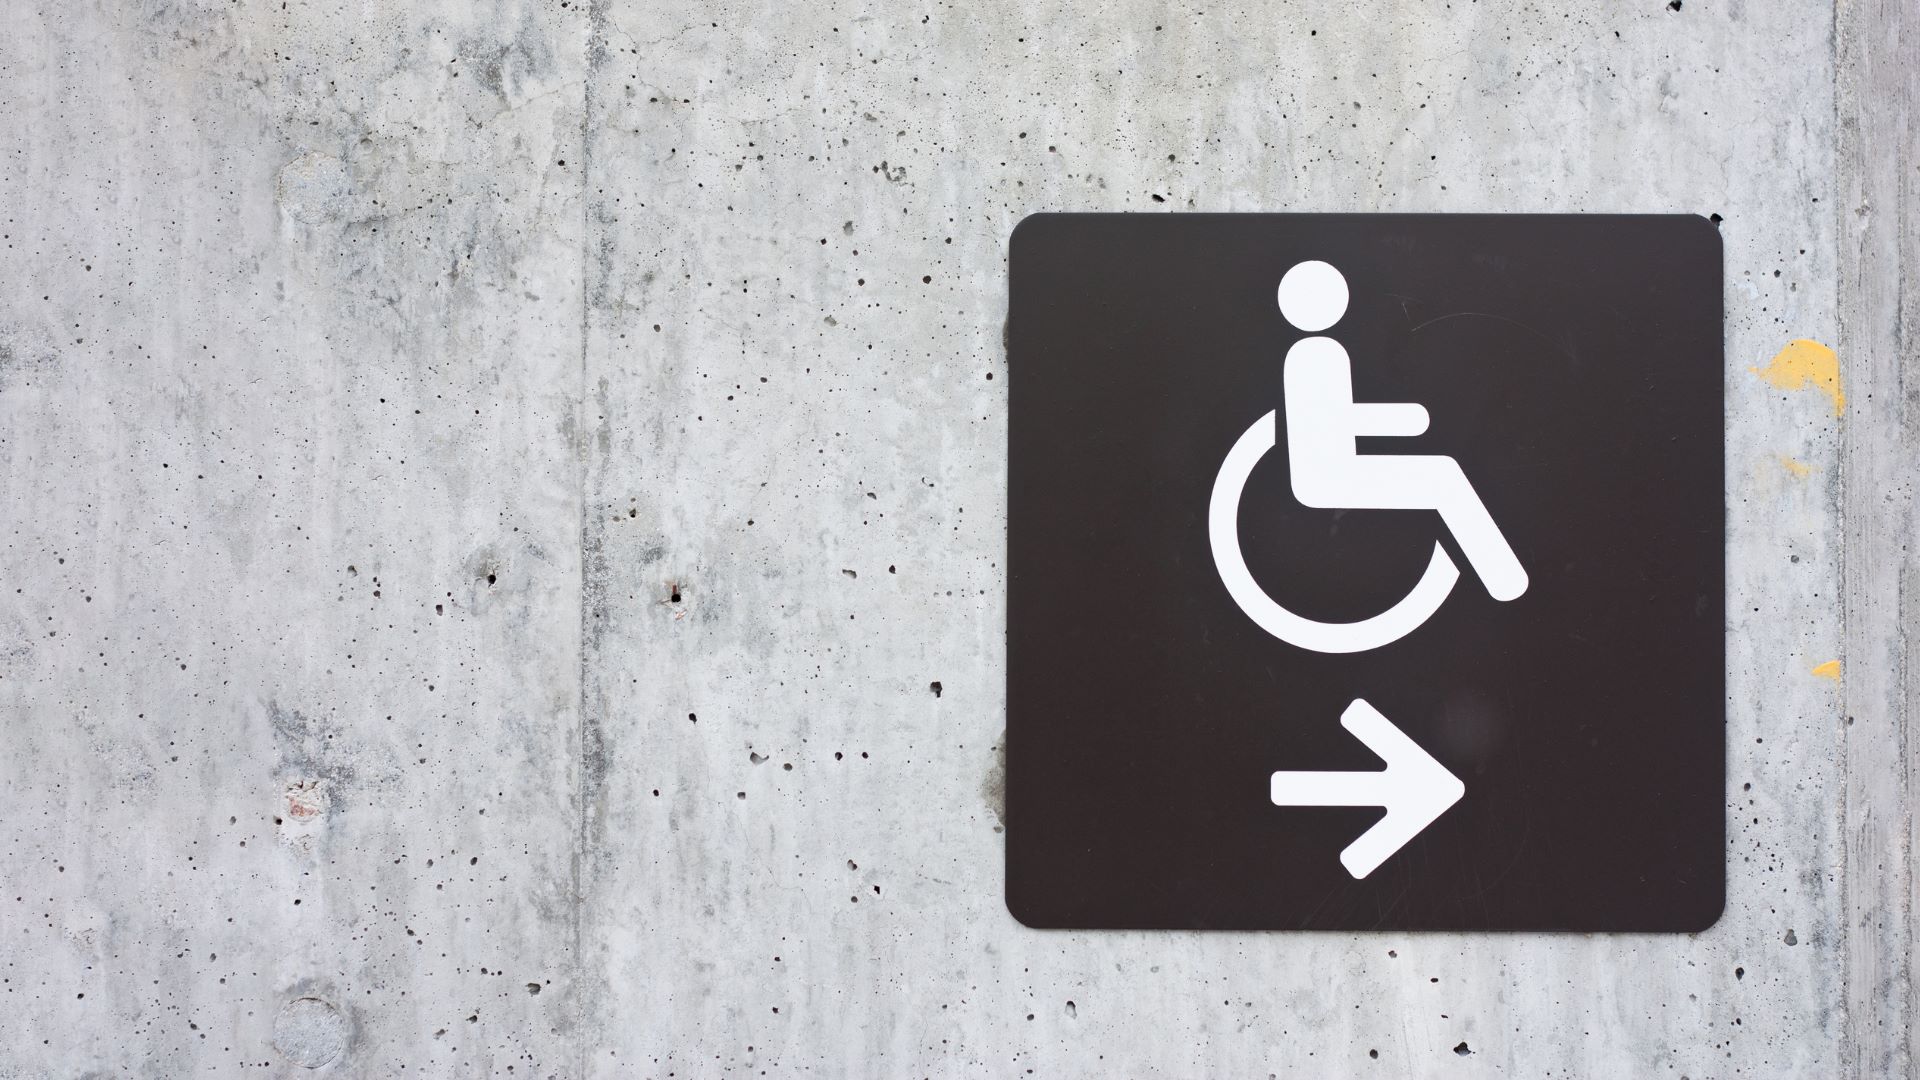 A black and white accessibility sign on a concrete wall